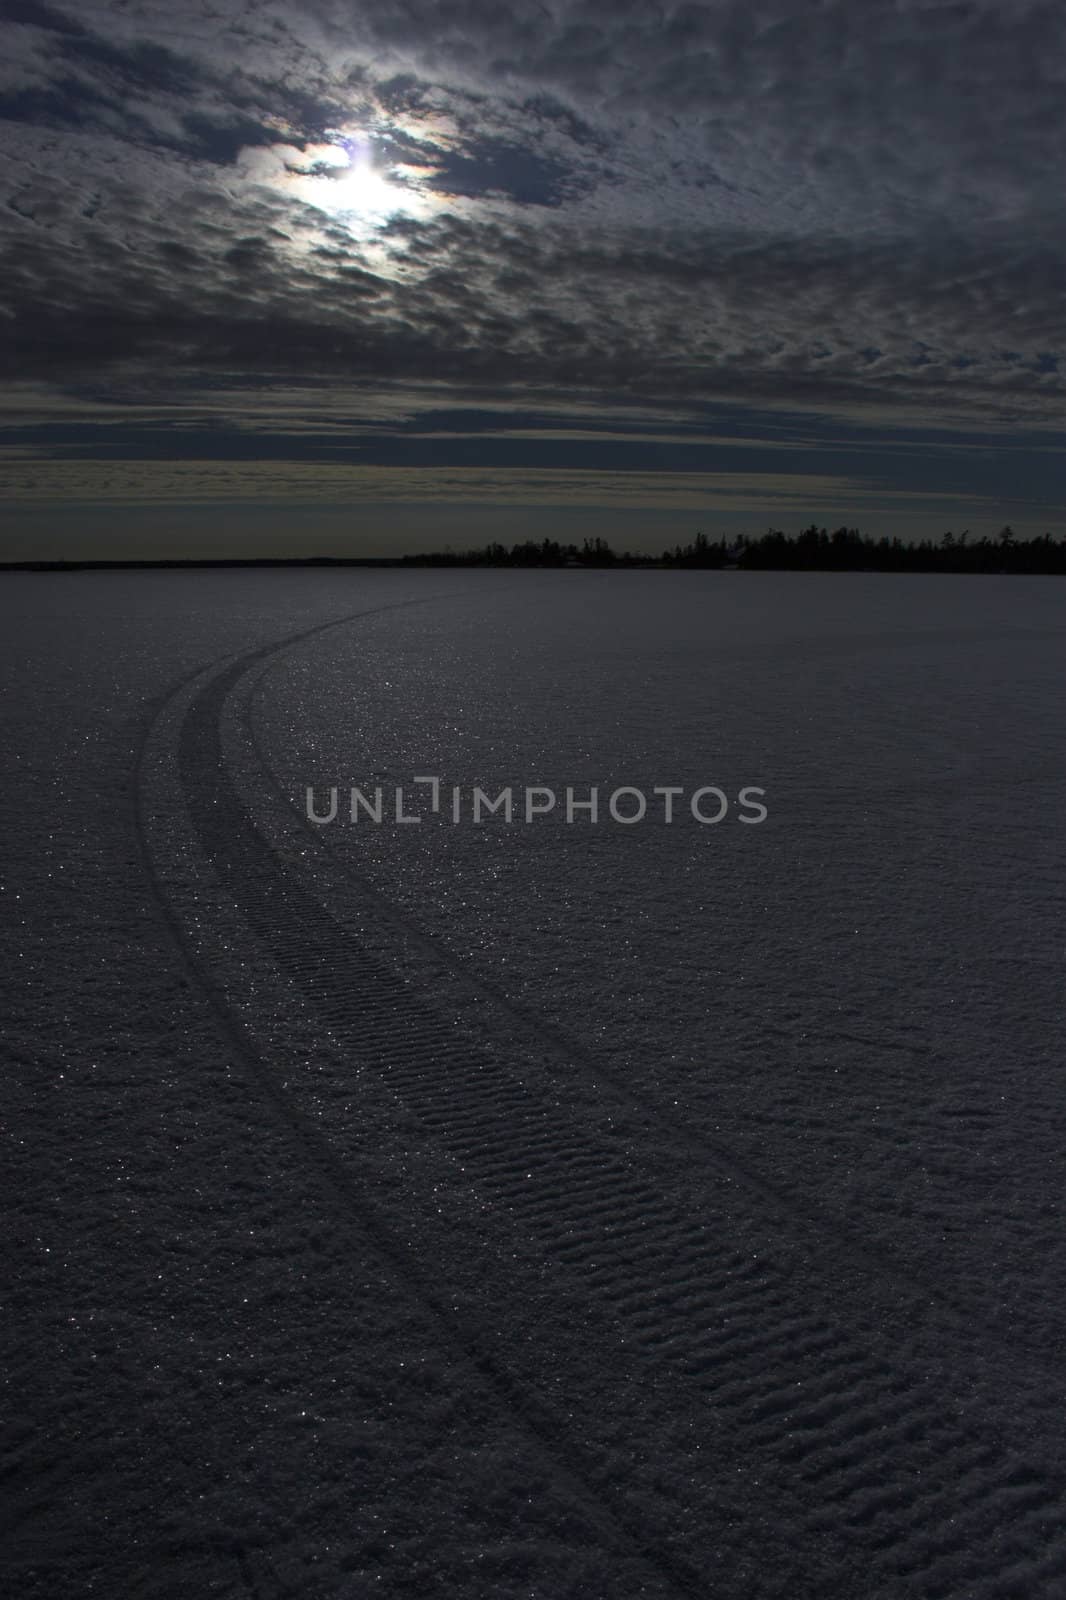 Snowmobile route at night over frozen lake with colorful reflections of the moon in snow crystals